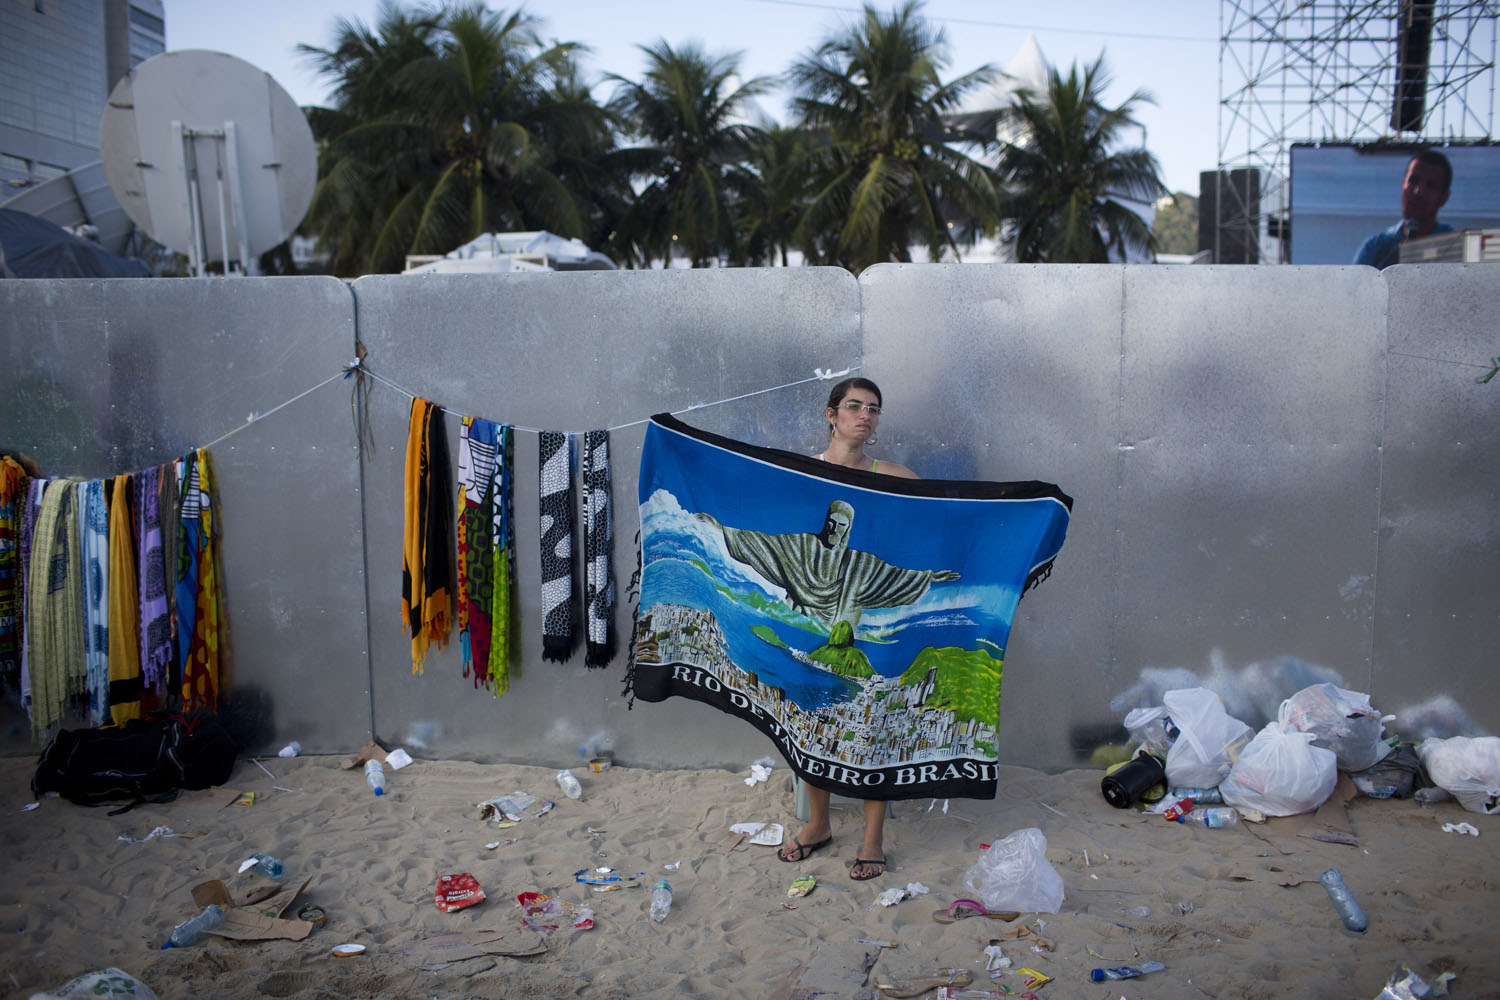 July 28, 2013. A street vendor sells a beach blanket with an image of Christ the Redeemer statue after the World Youth Day's closing Mass, celebrated by Pope Francis on the Copacabana beachfront in Rio de Janeiro, Brazil.